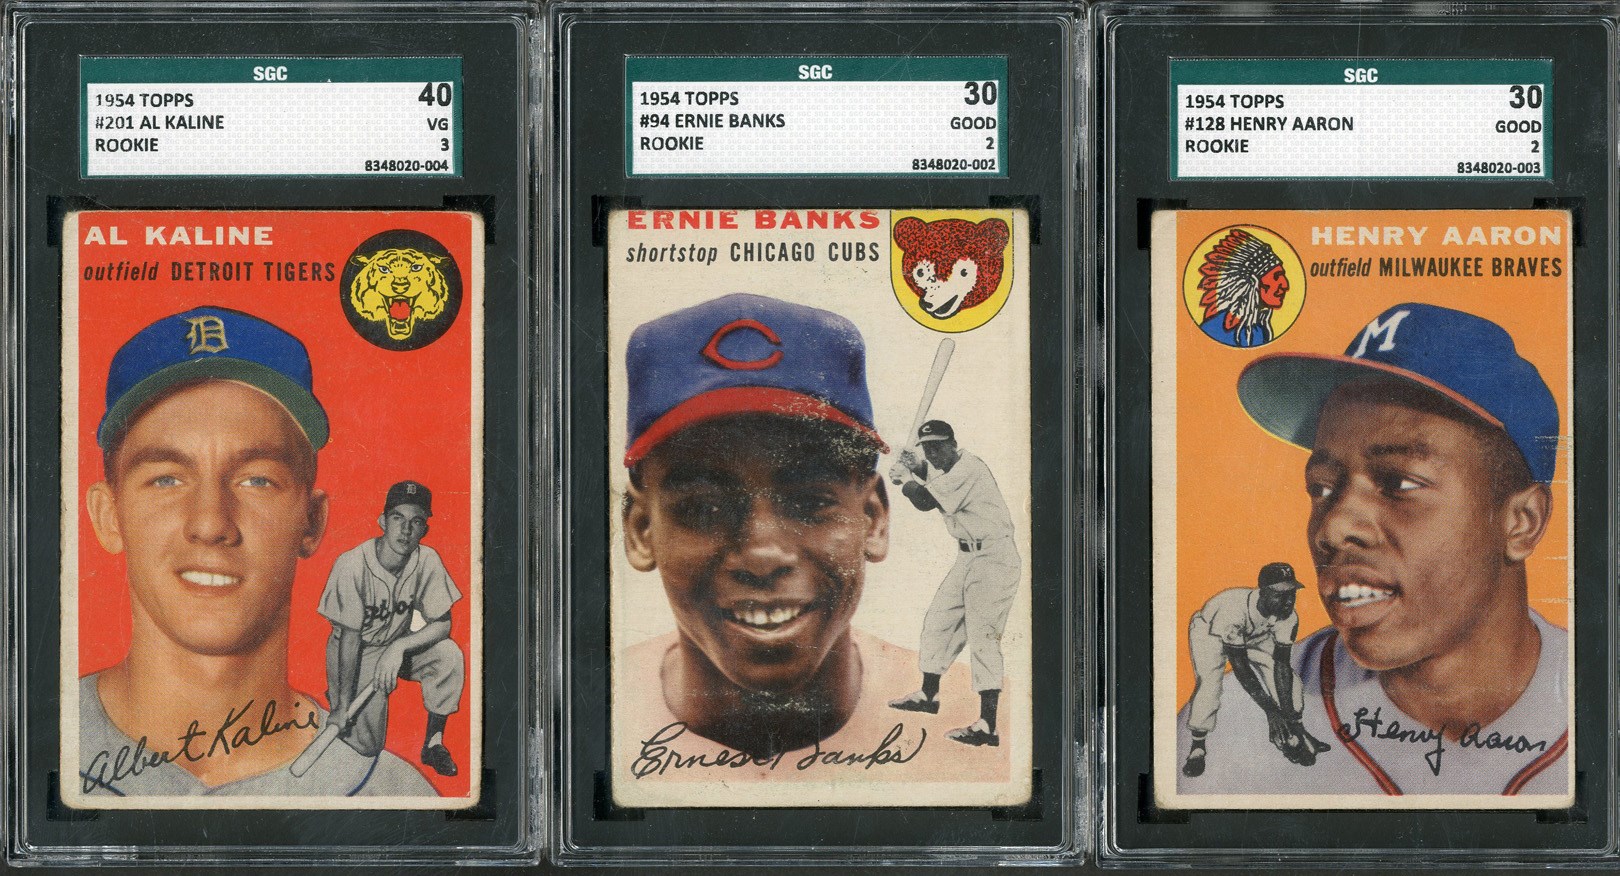 1954 Topps Complete Set (250 Cards - 3 SGC Graded)